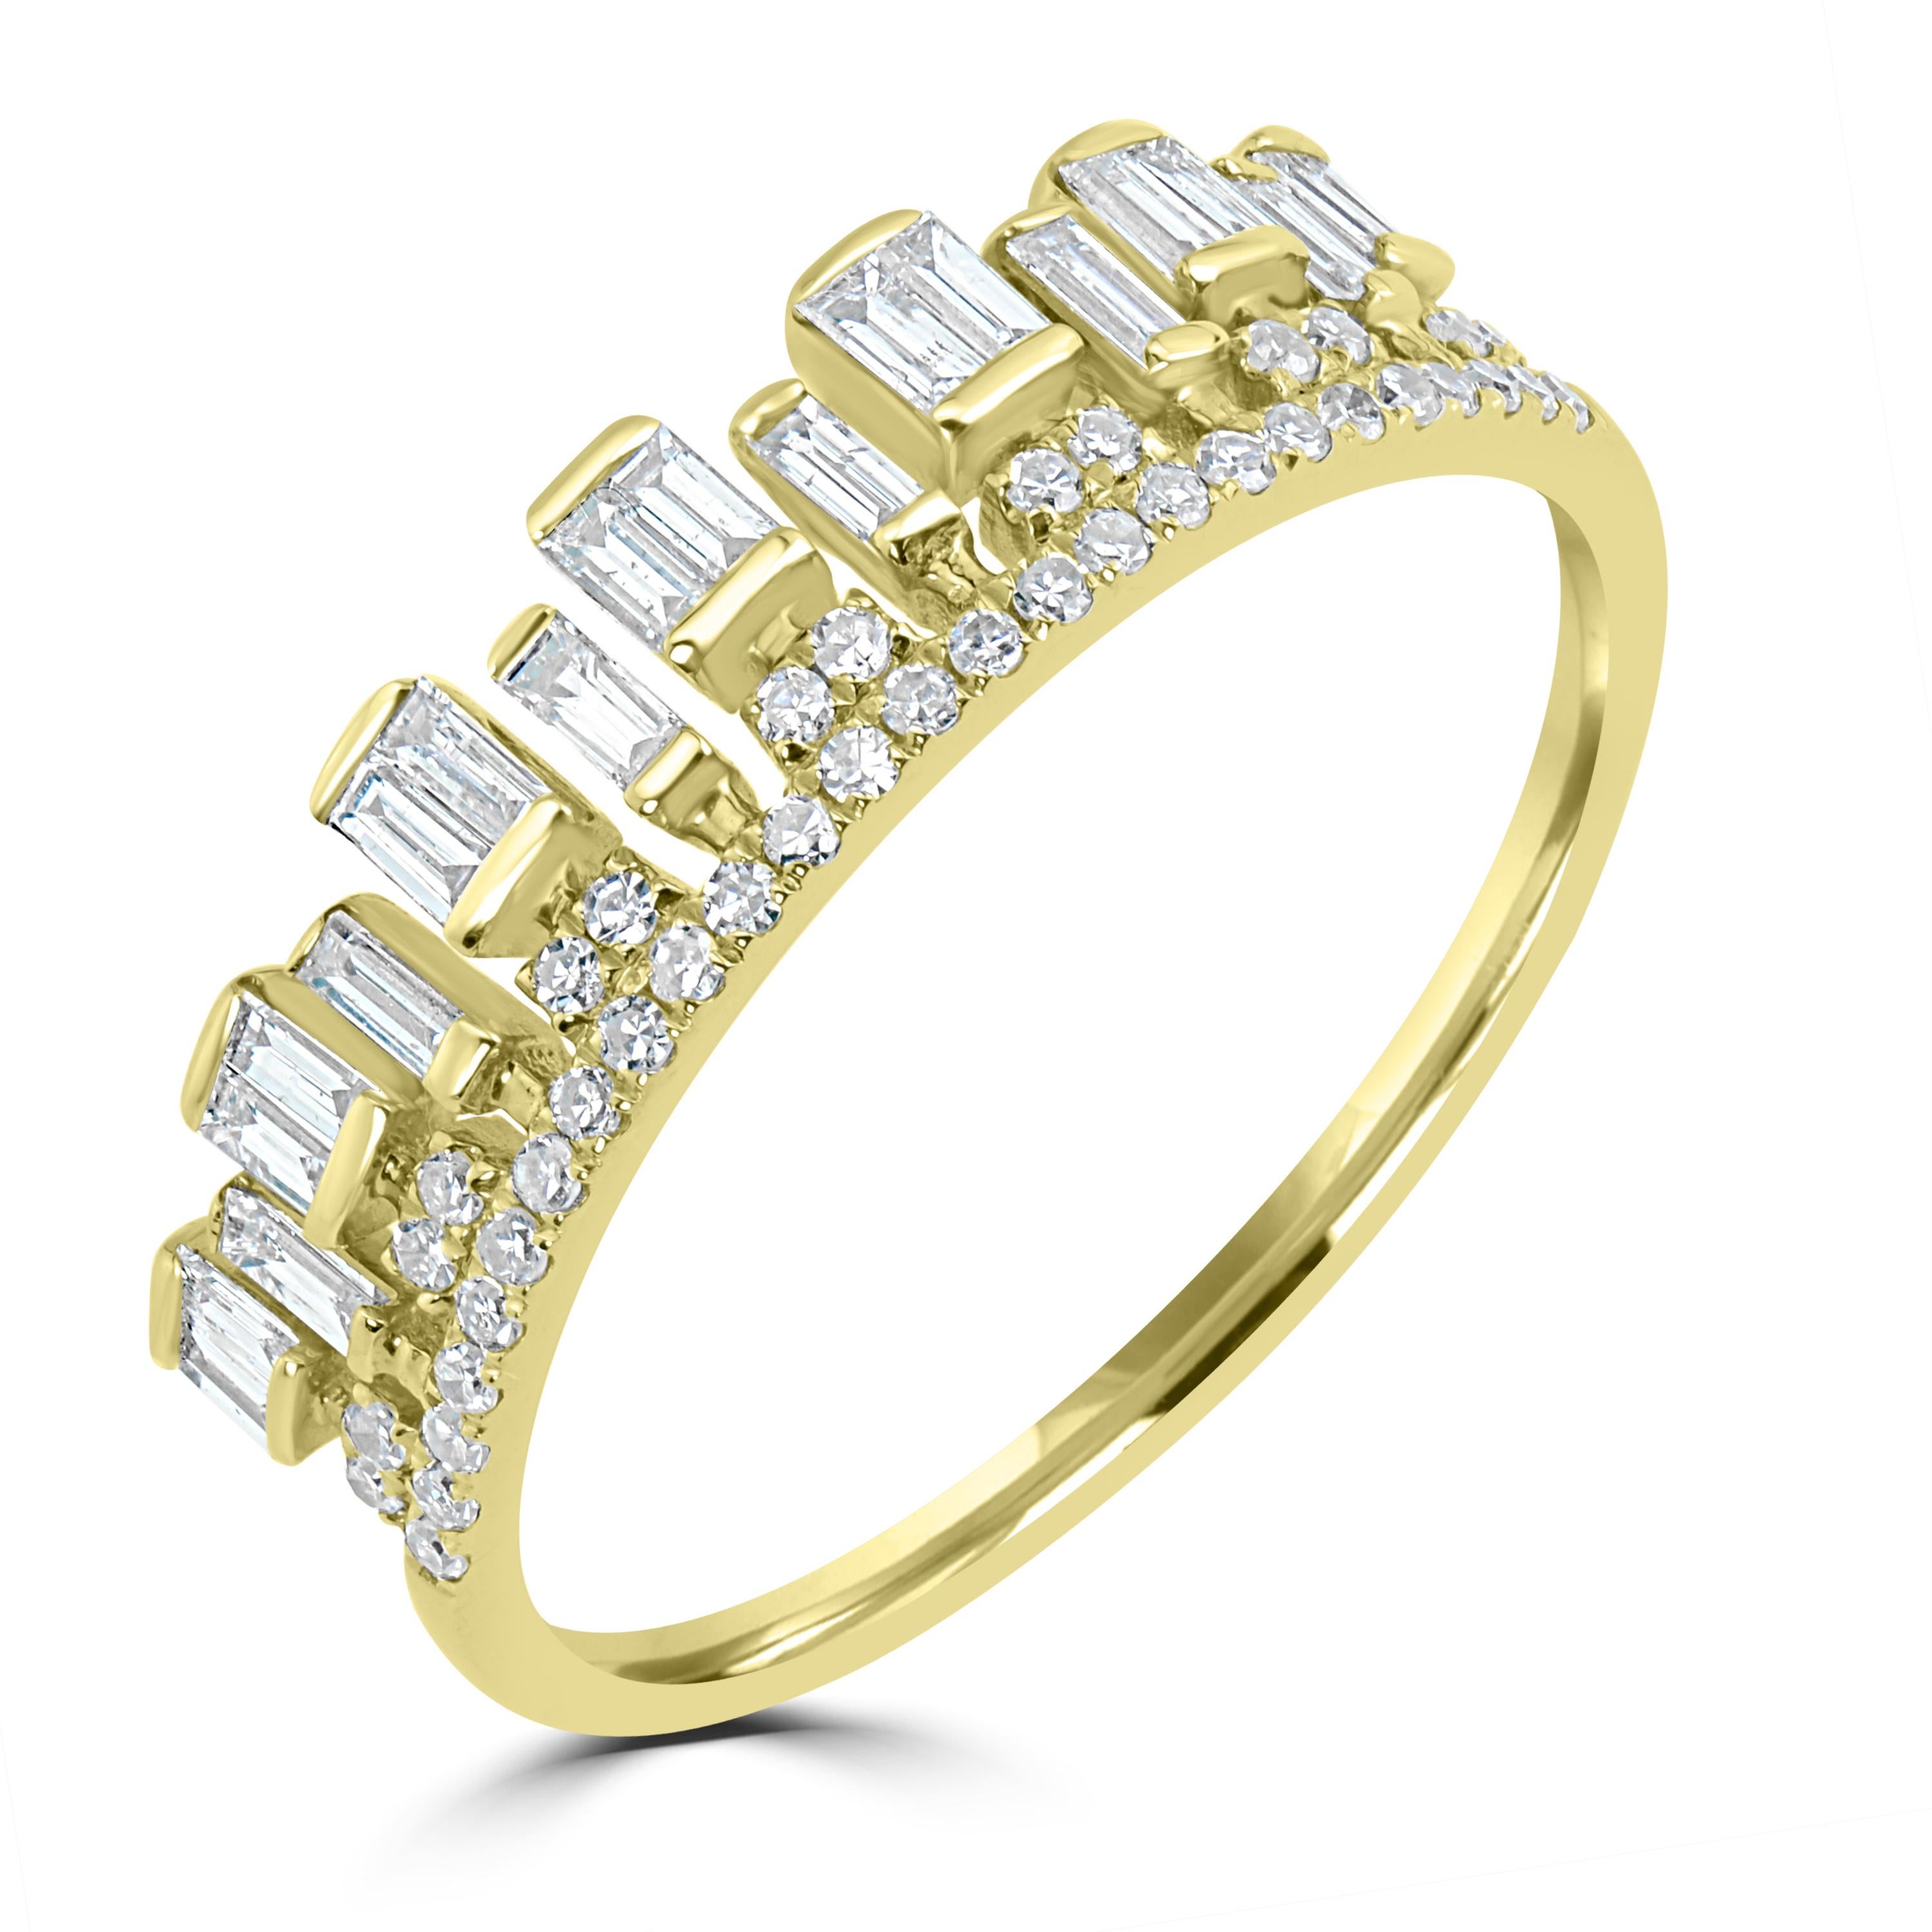 This Luxle beautiful and bold ring contains artfully embellished baguettes glimmering from a row of pave set round diamonds bestow an upscale look in 14K yellow gold. The diamonds are SI1 in clarity and GH in color, weighing 0.38 Cts.
Please follow